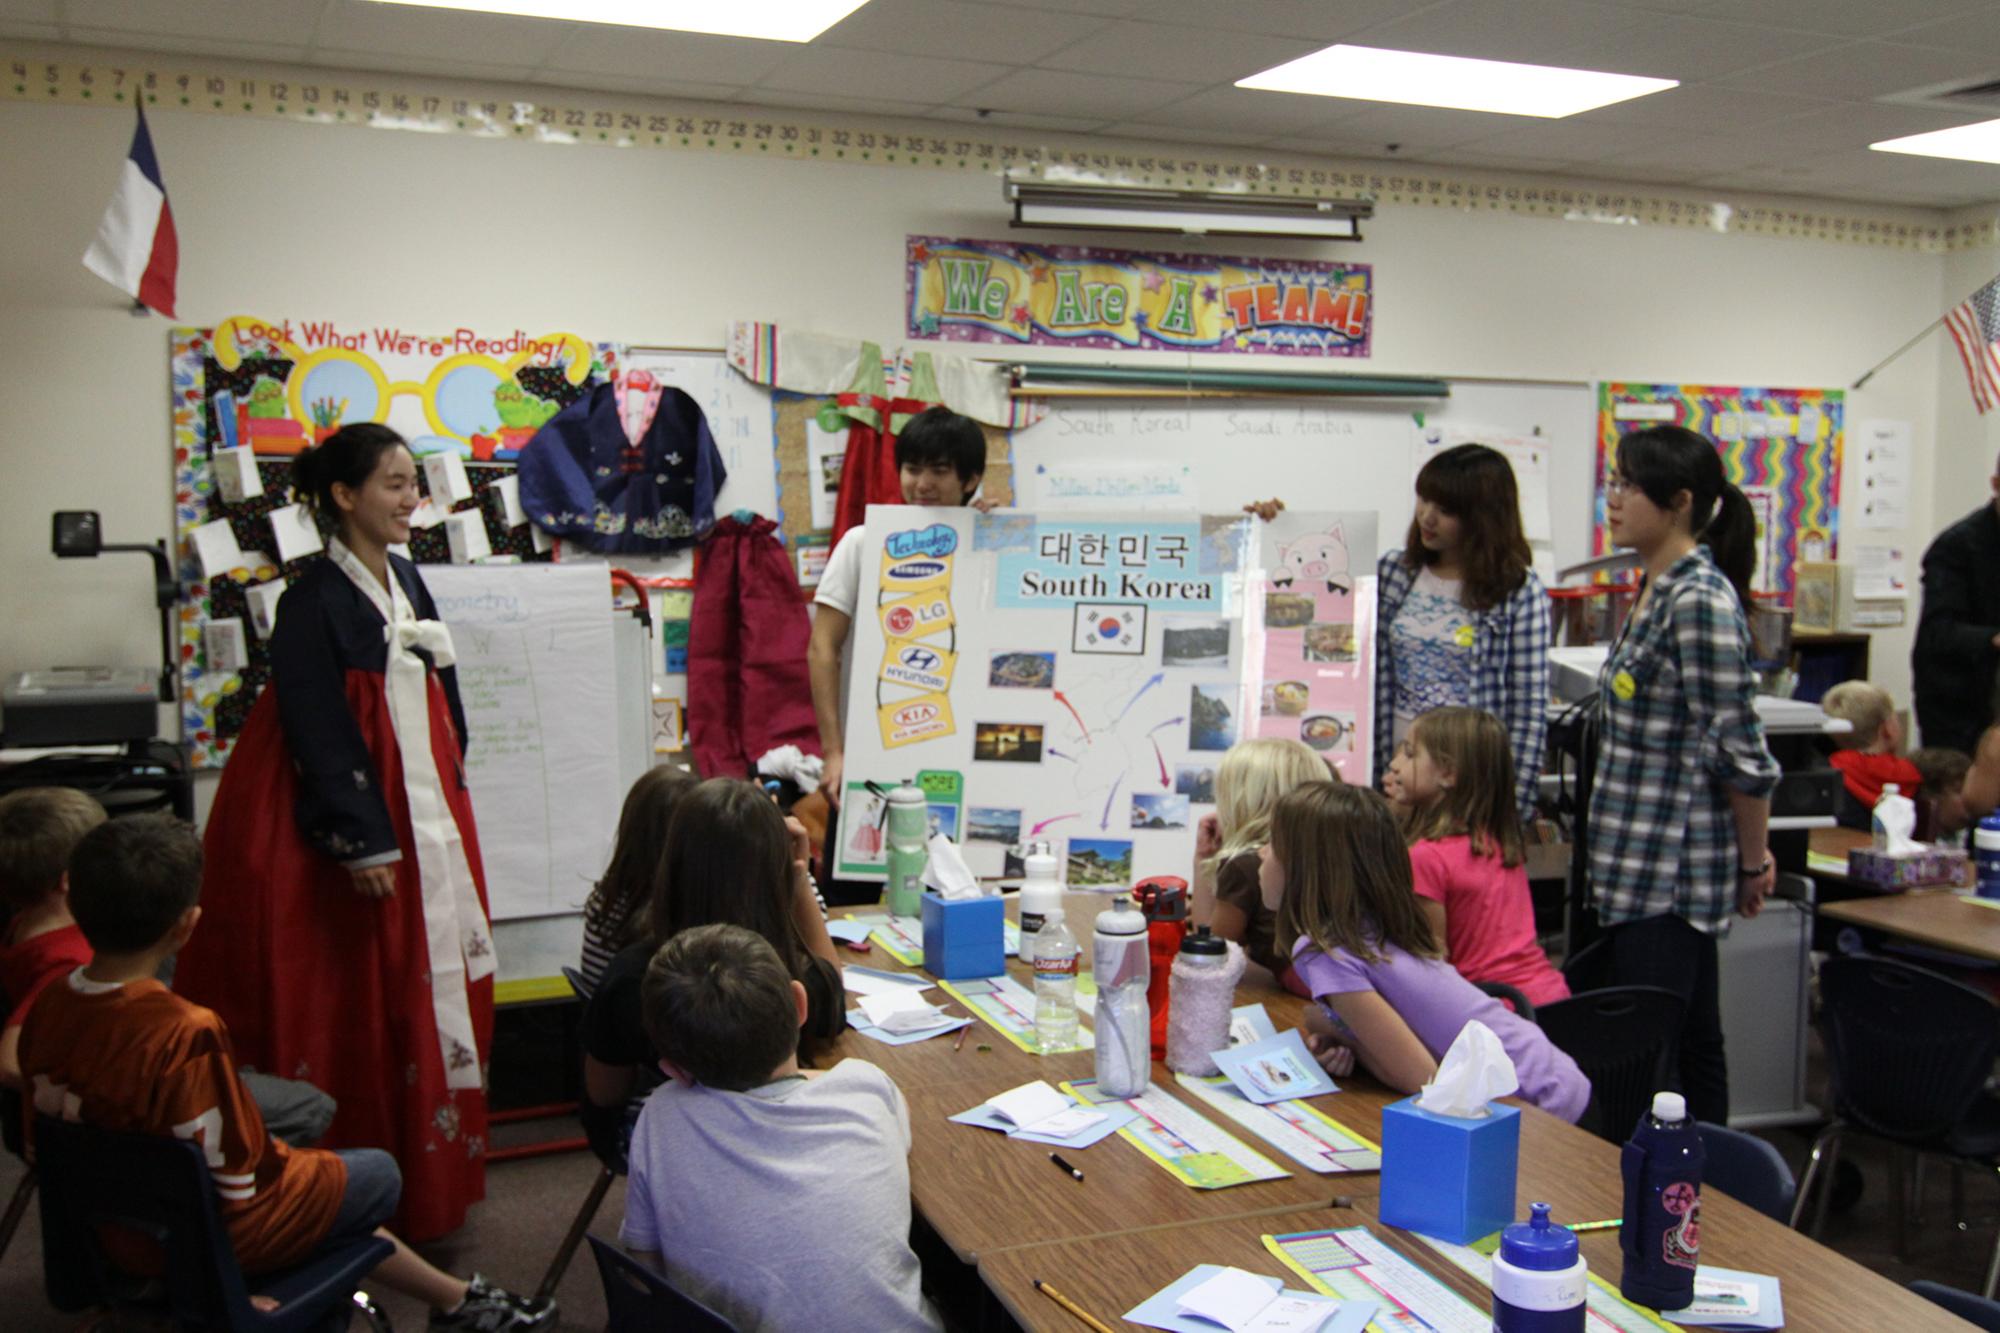 students present their board wearing traditional garb to classroom full of students